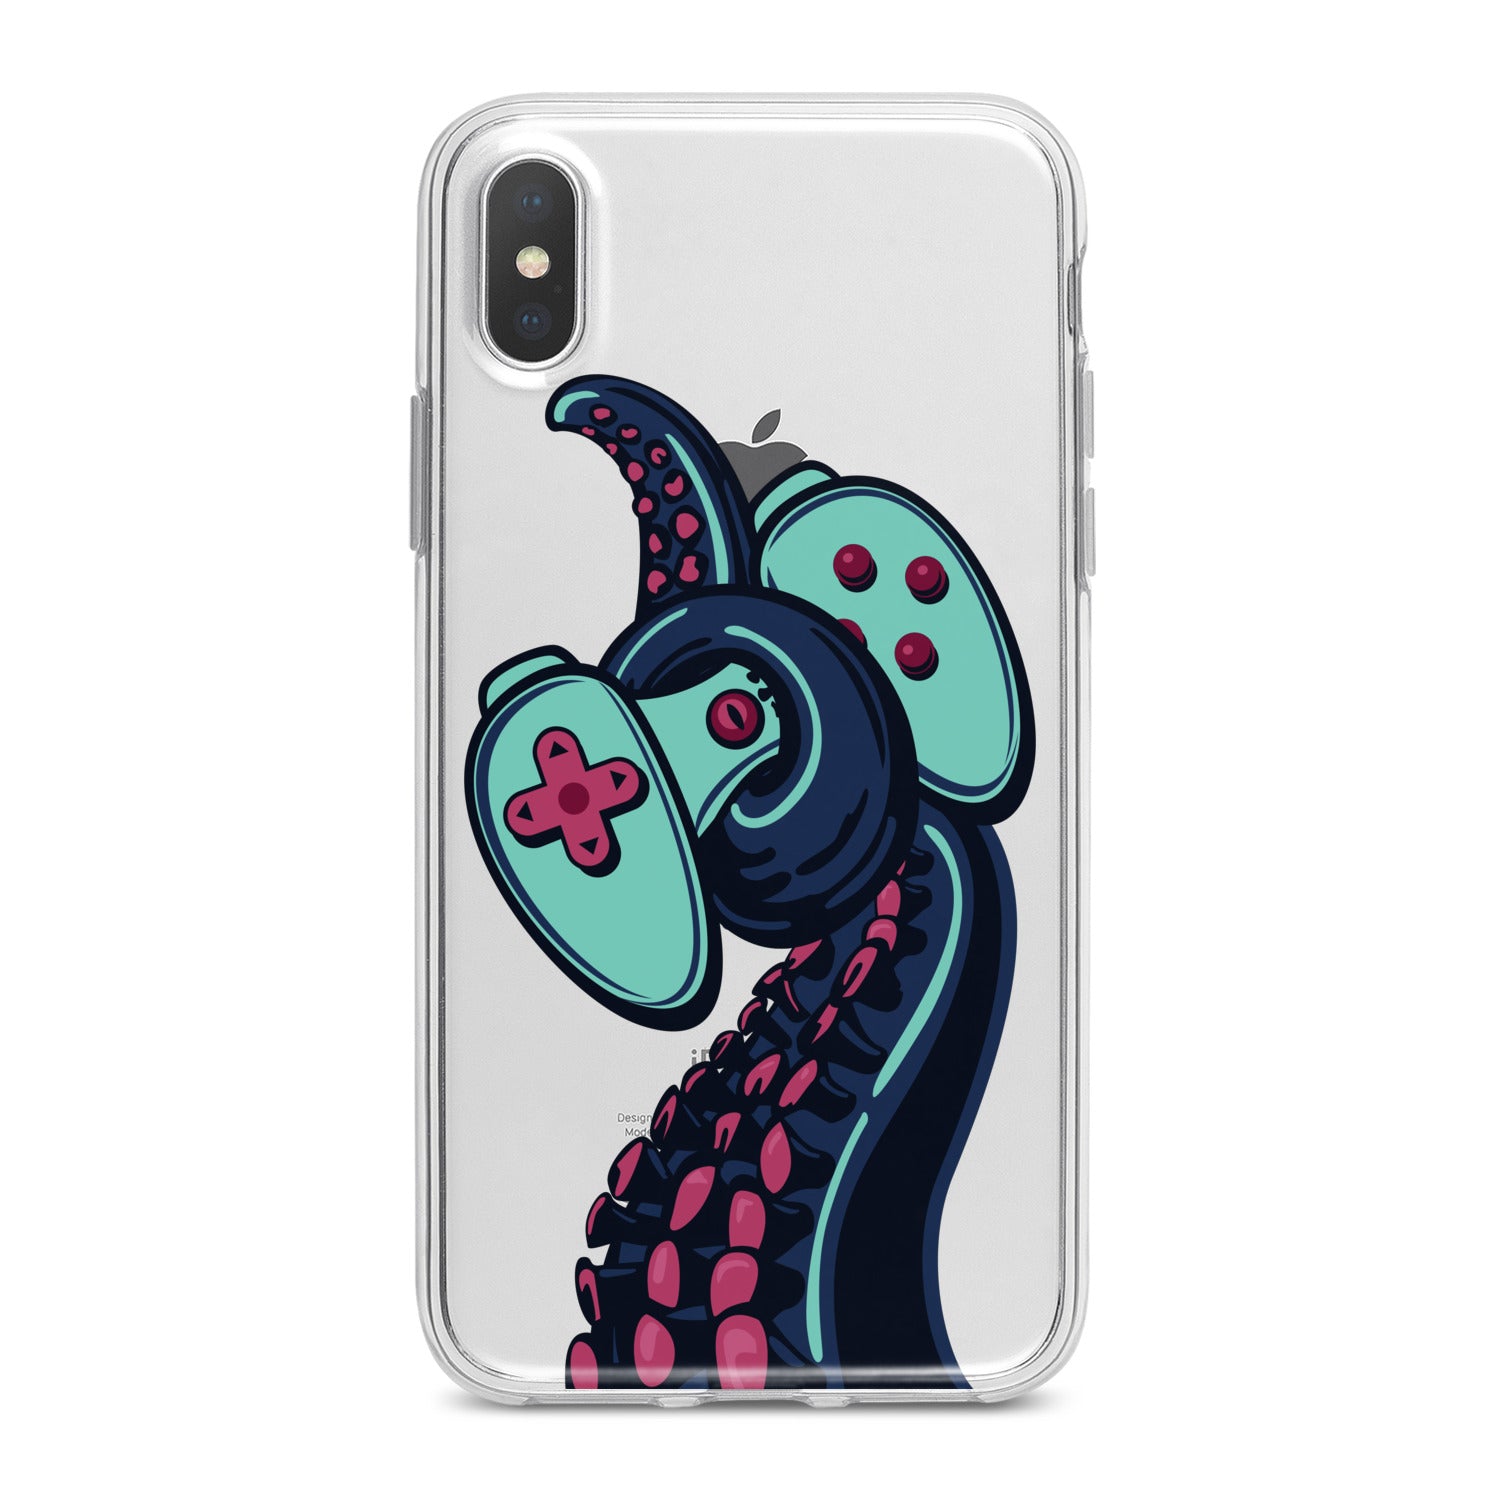 Lex Altern Octopus Gamepad Phone Case for your iPhone & Android phone.